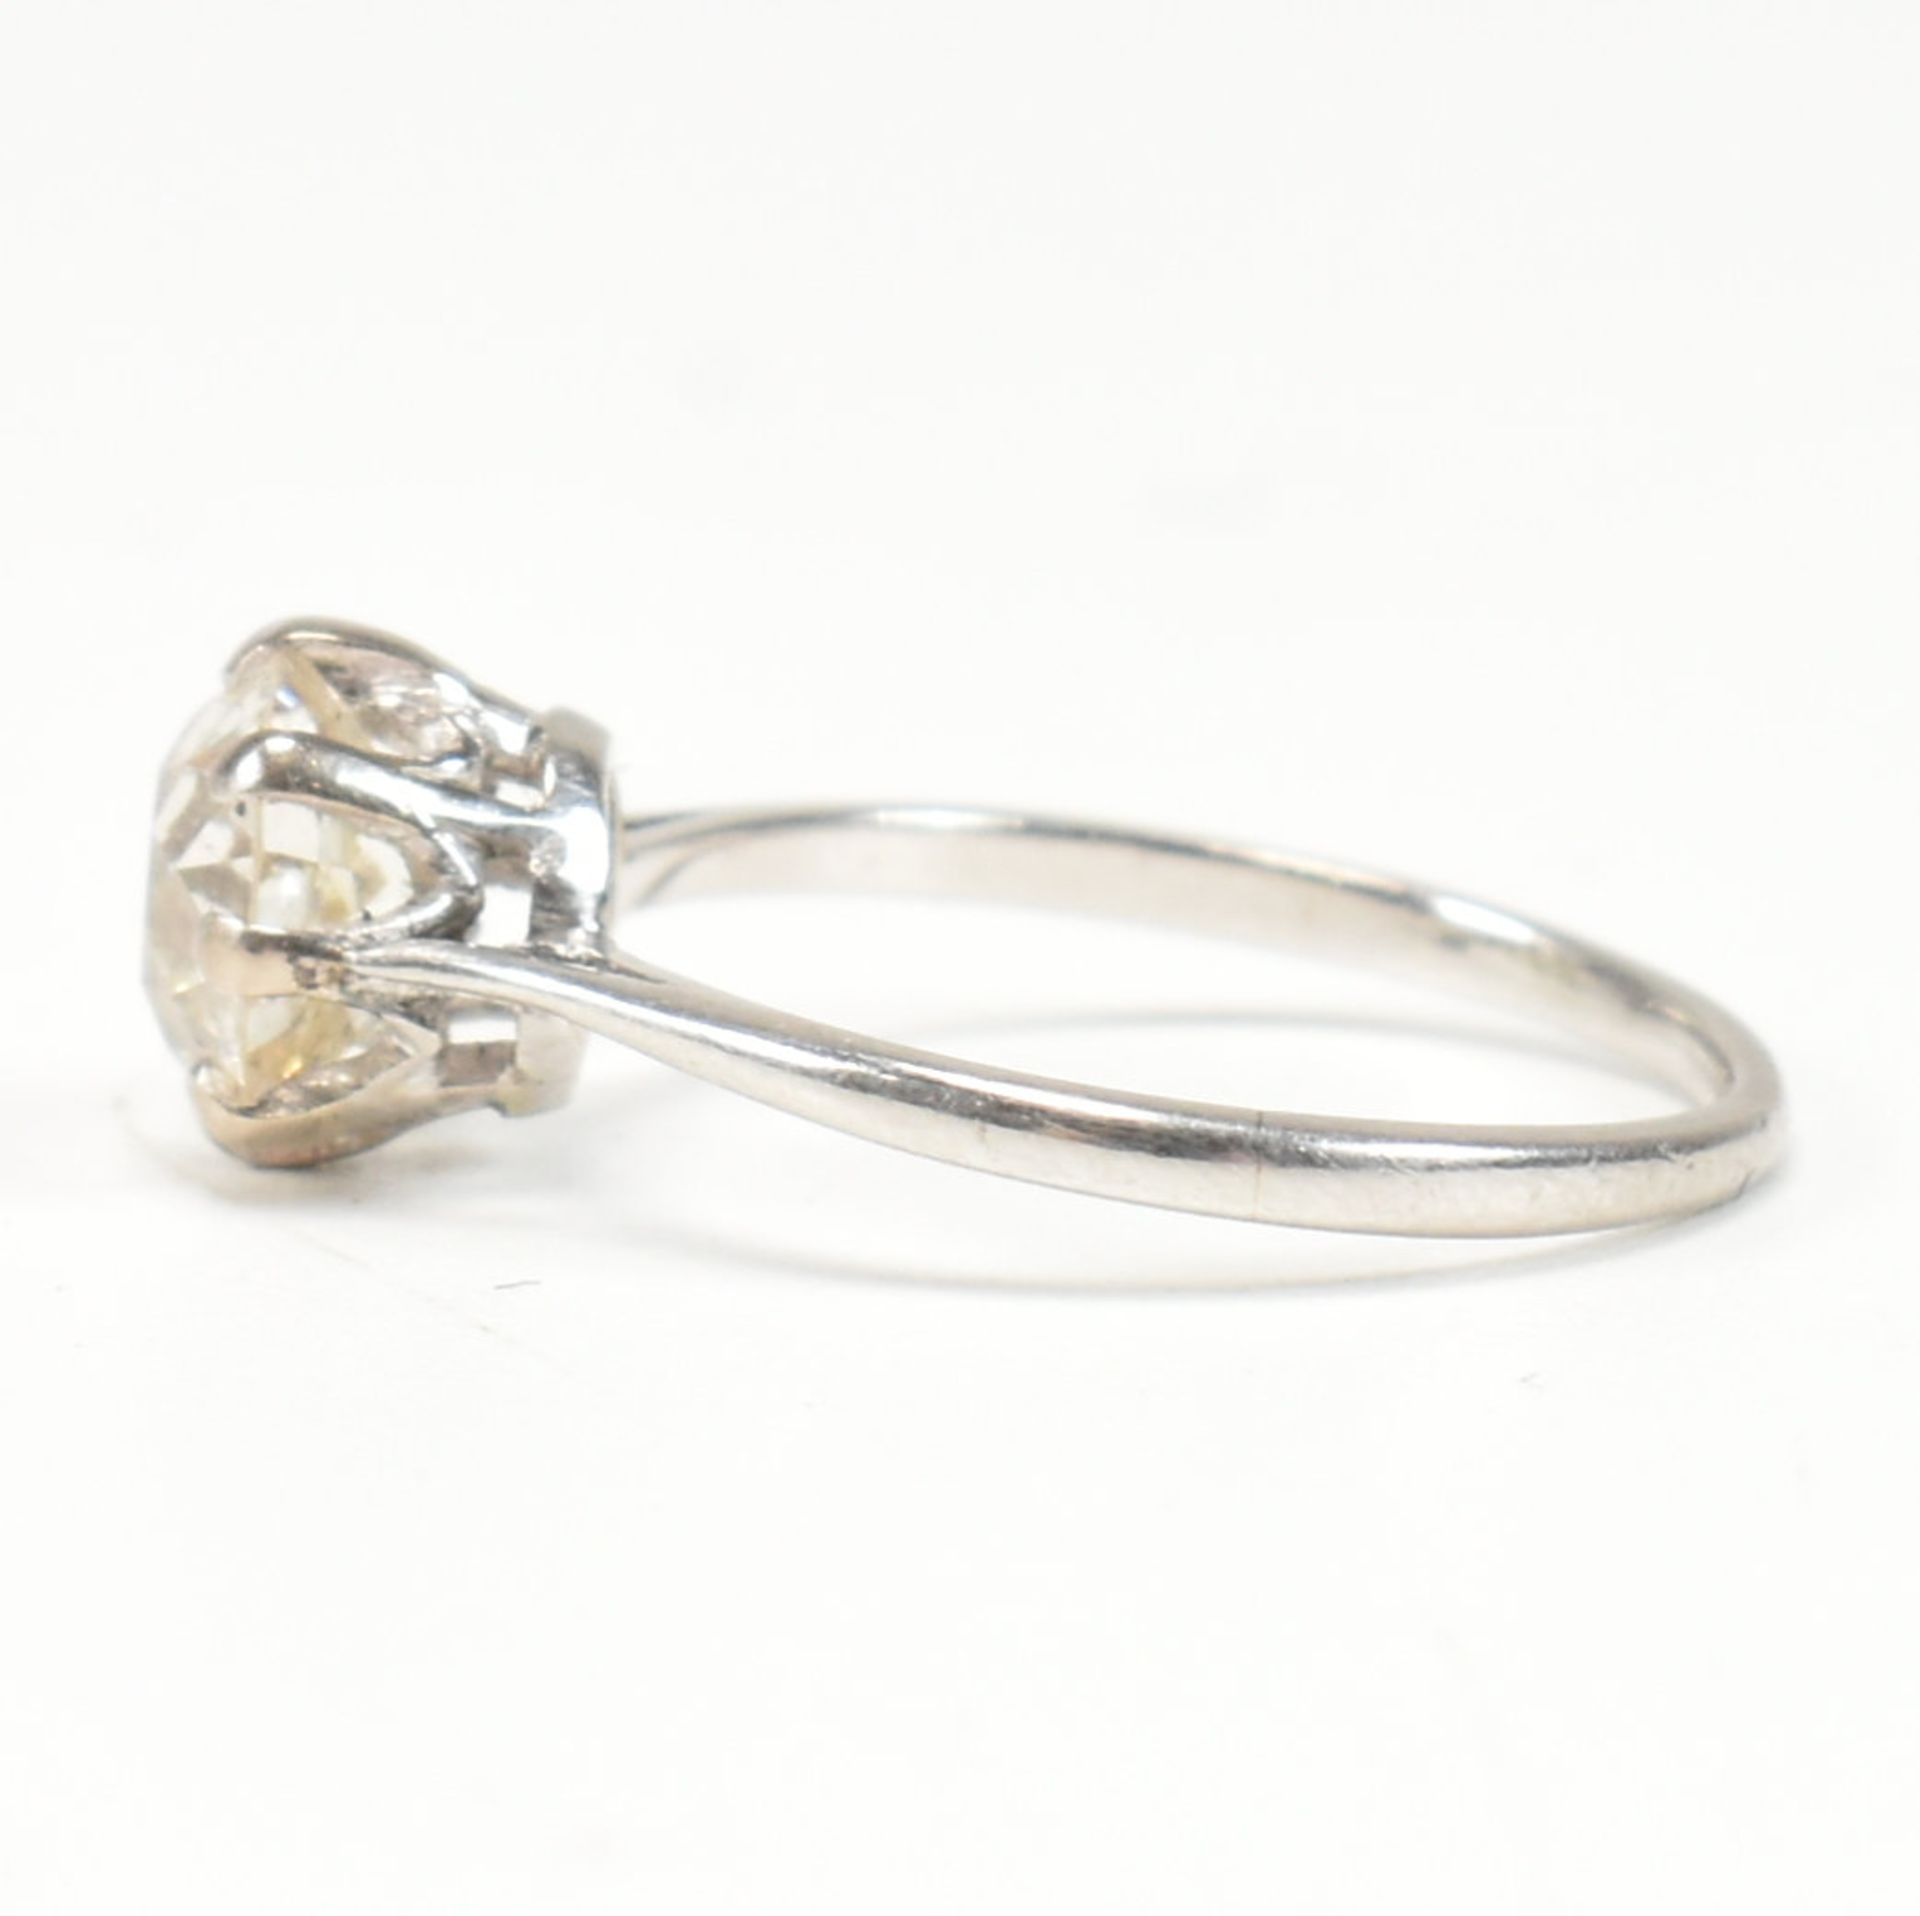 1930S 1.7CT DIAMOND SOLITAIRE RING - Image 5 of 9